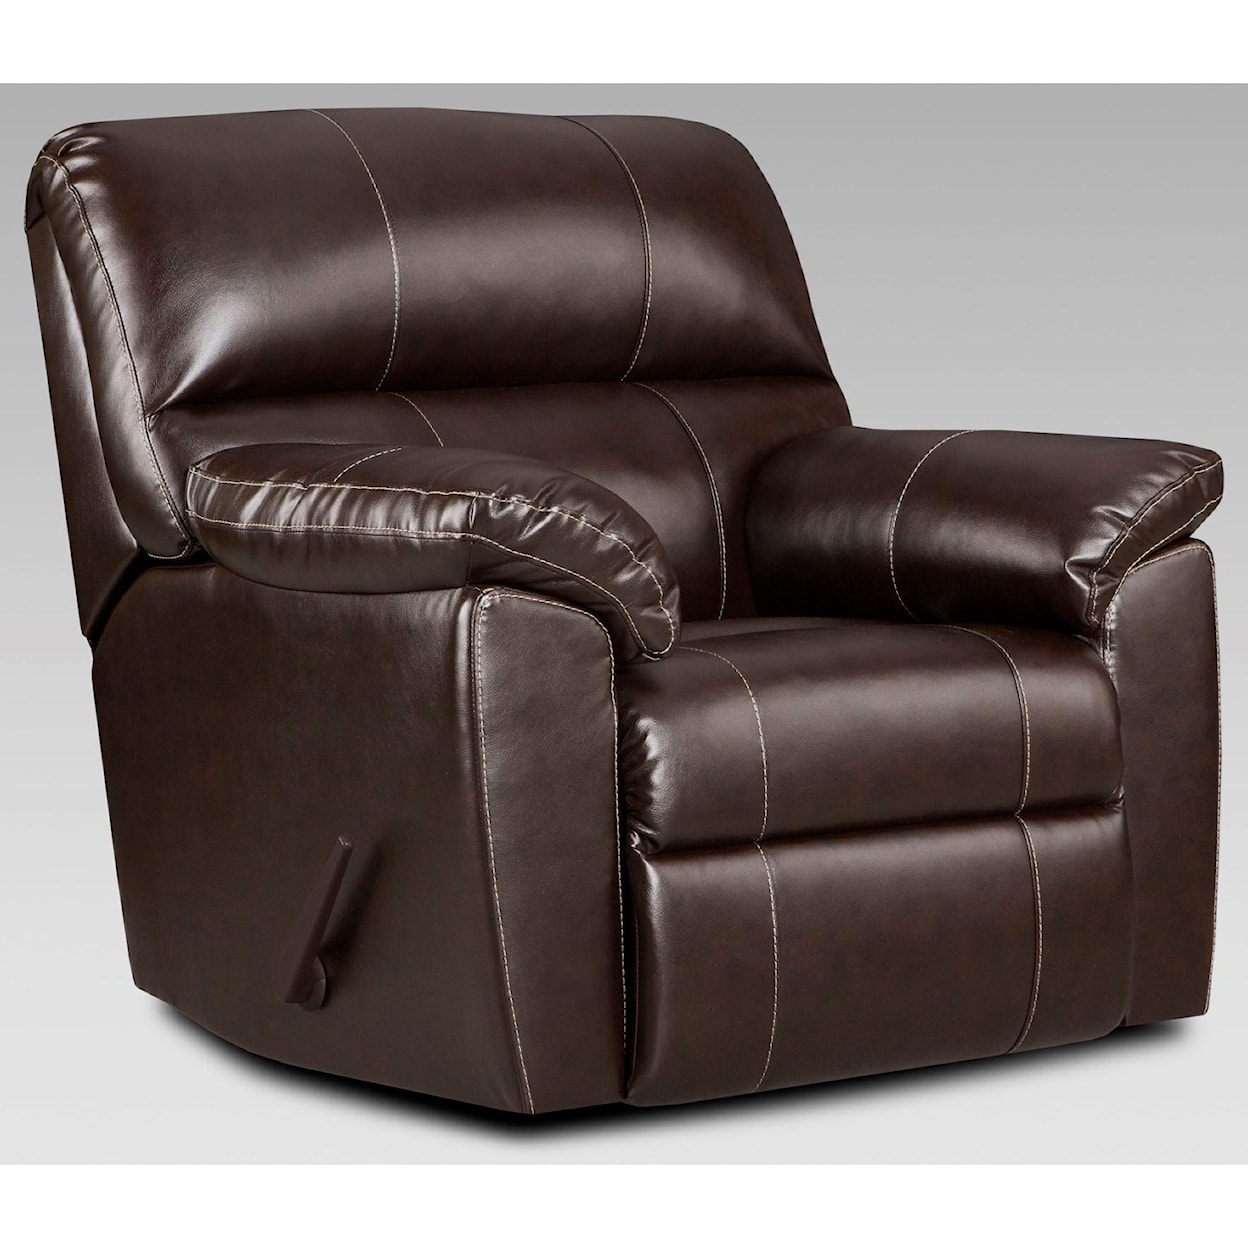 Affordable Furniture 2450 EASTON CHOCOLATE RECLINER |